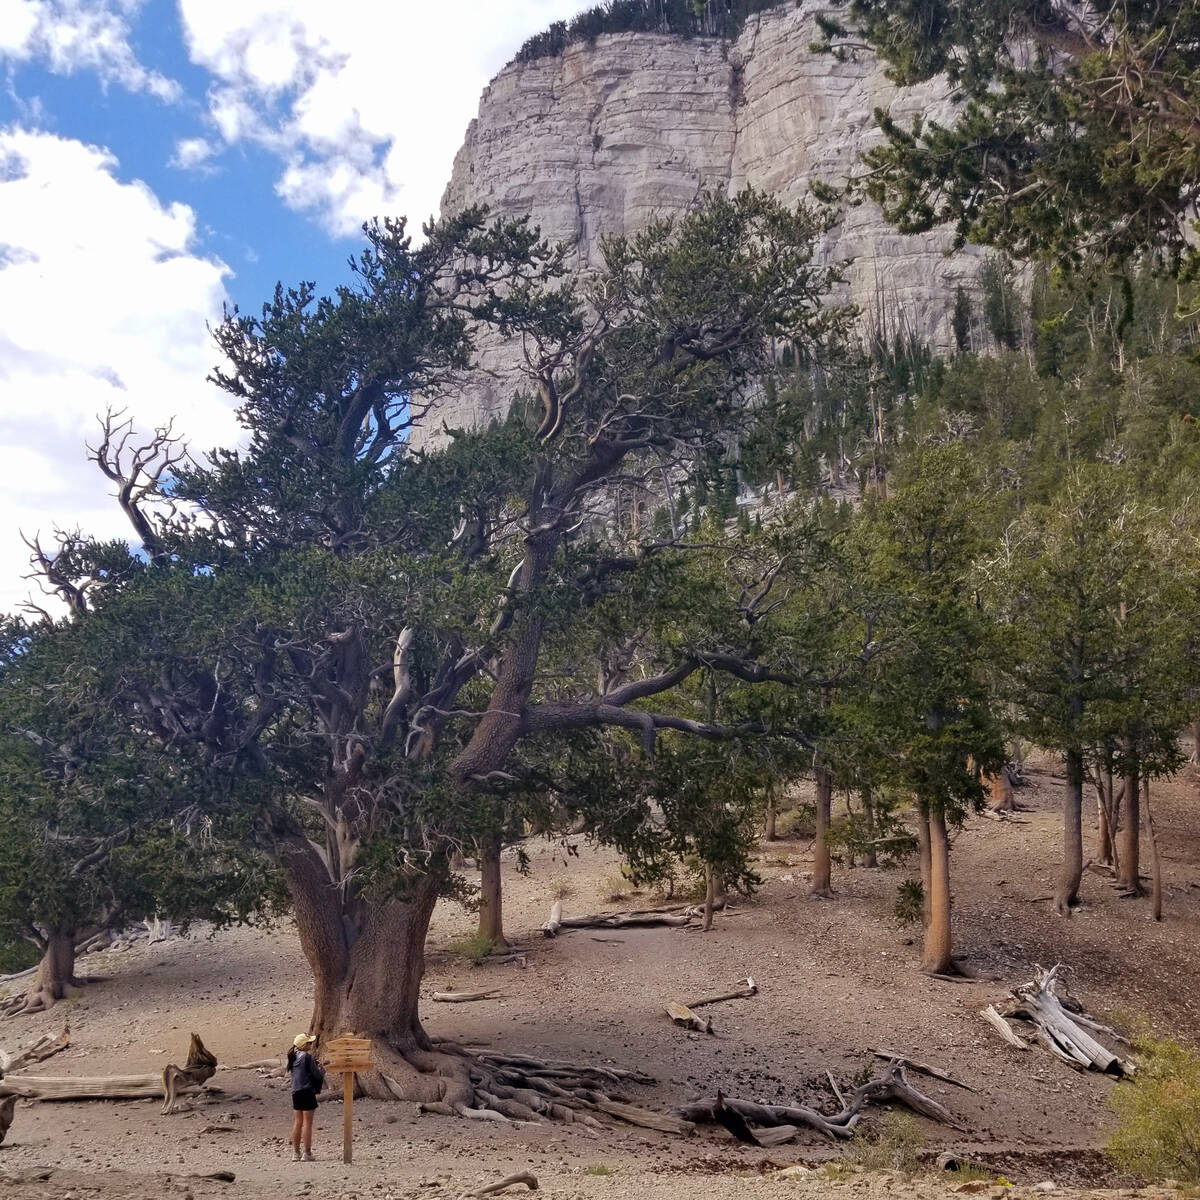 A hiker admires Raintree, which is estimated to be 3,000 years old, along Mount Charleston&#x20 ...